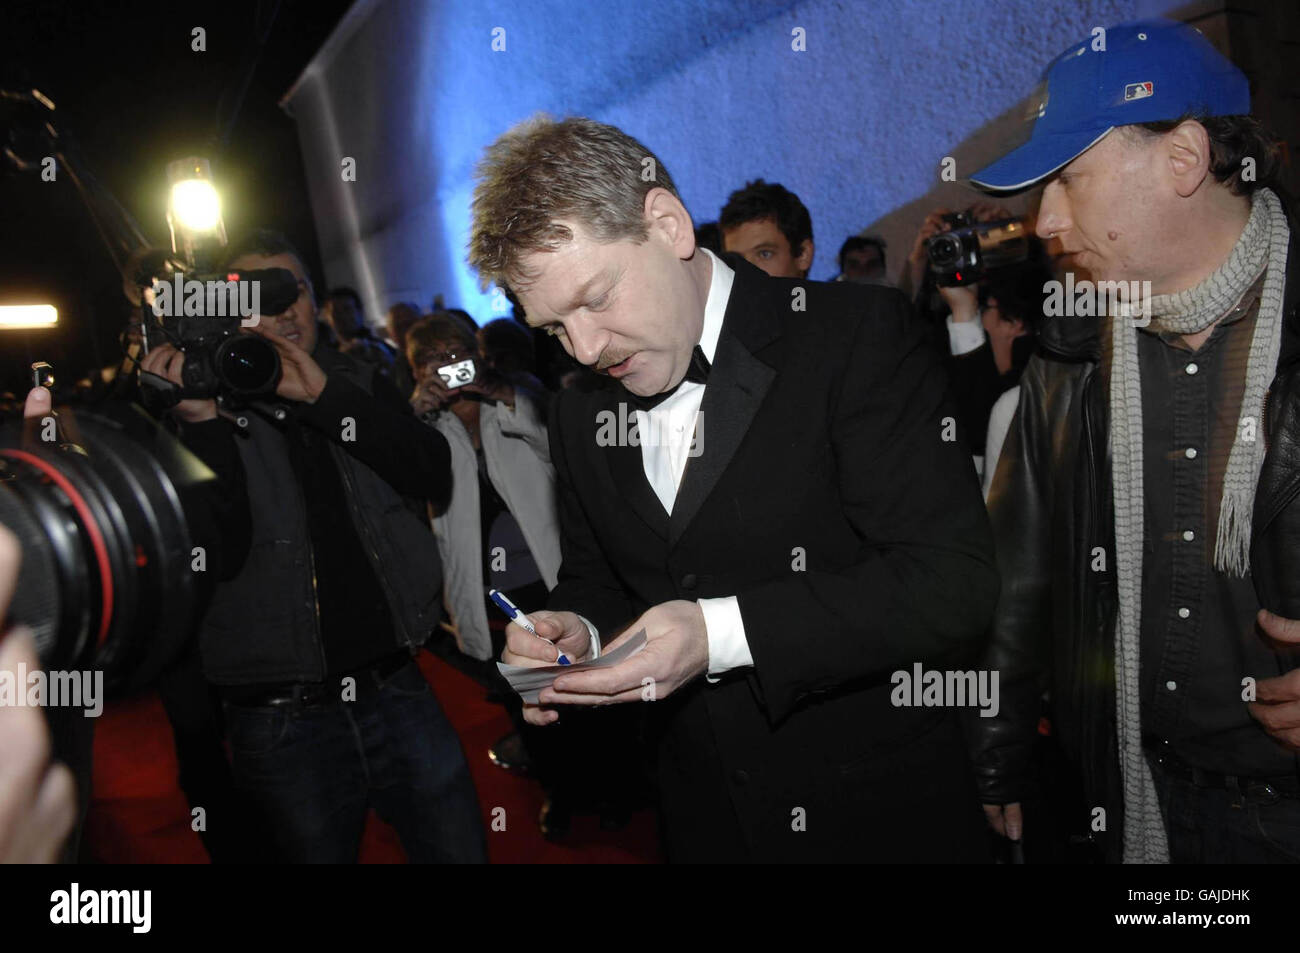 Actor and director Kenneth Branagh attends the world premiere of his movie Alien Love Triangle in the tiny La Charrette cinemanear Swansea. Stock Photo